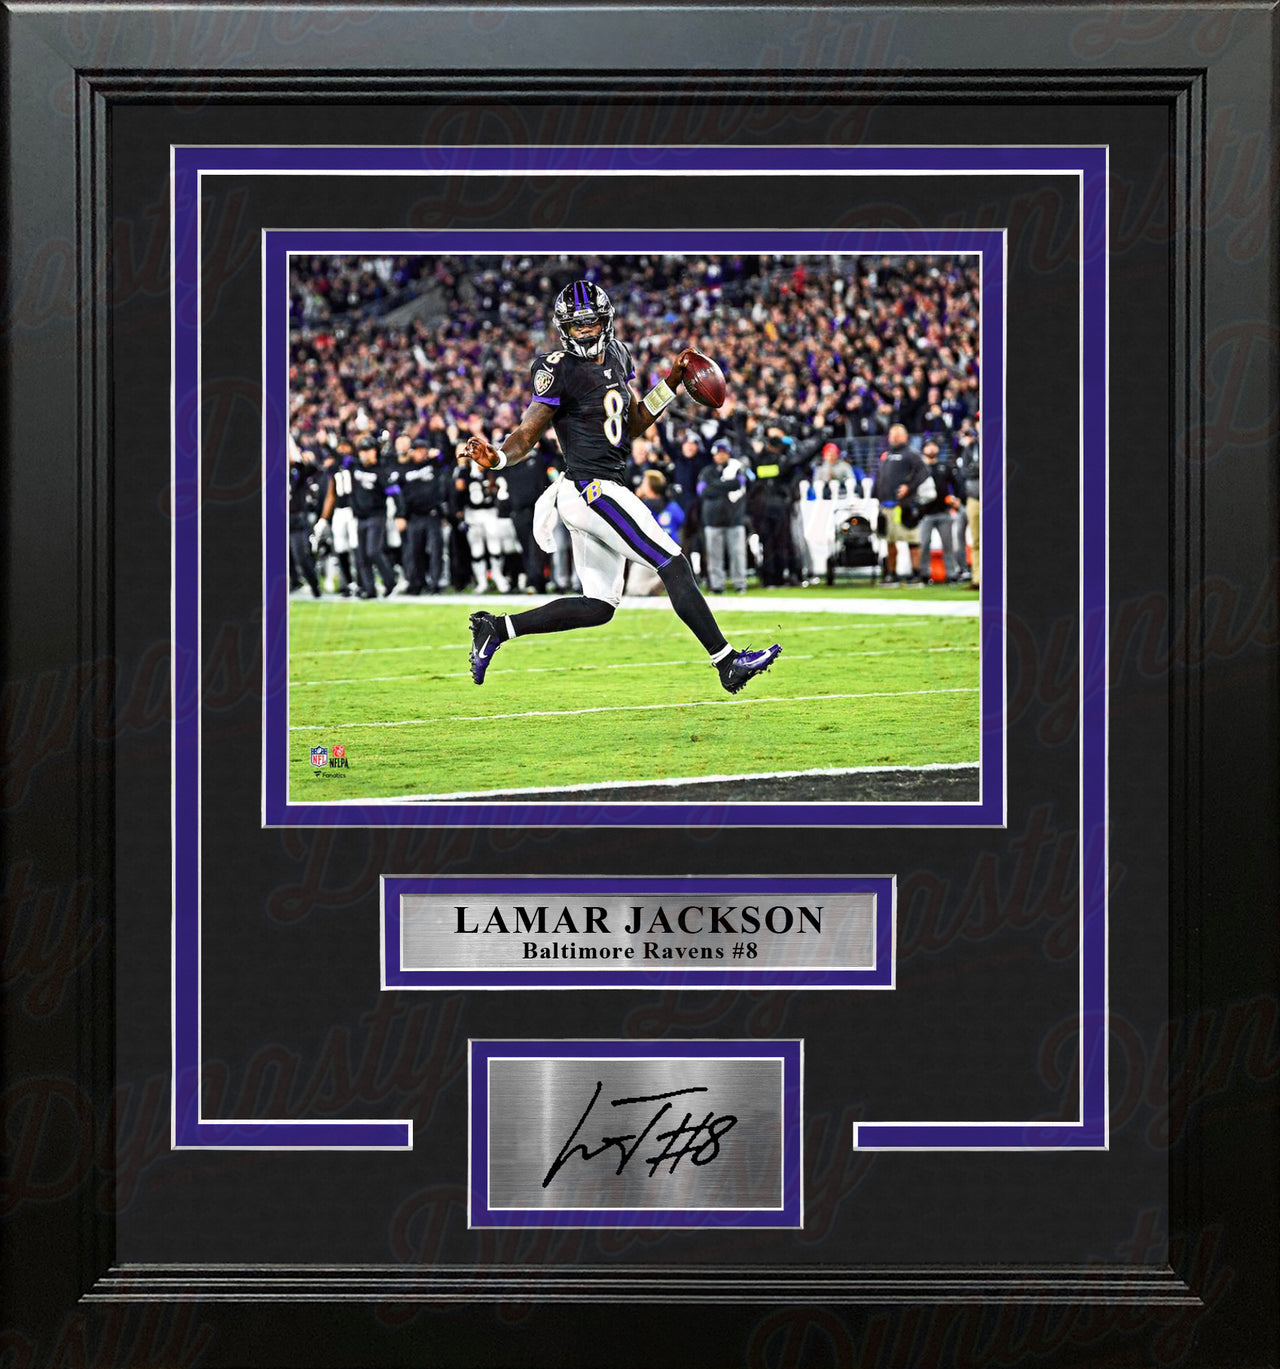 Lamar Jackson High-Stepping Touchdown Baltimore Ravens 8x10 Framed Photo with Engraved Autograph - Dynasty Sports & Framing 